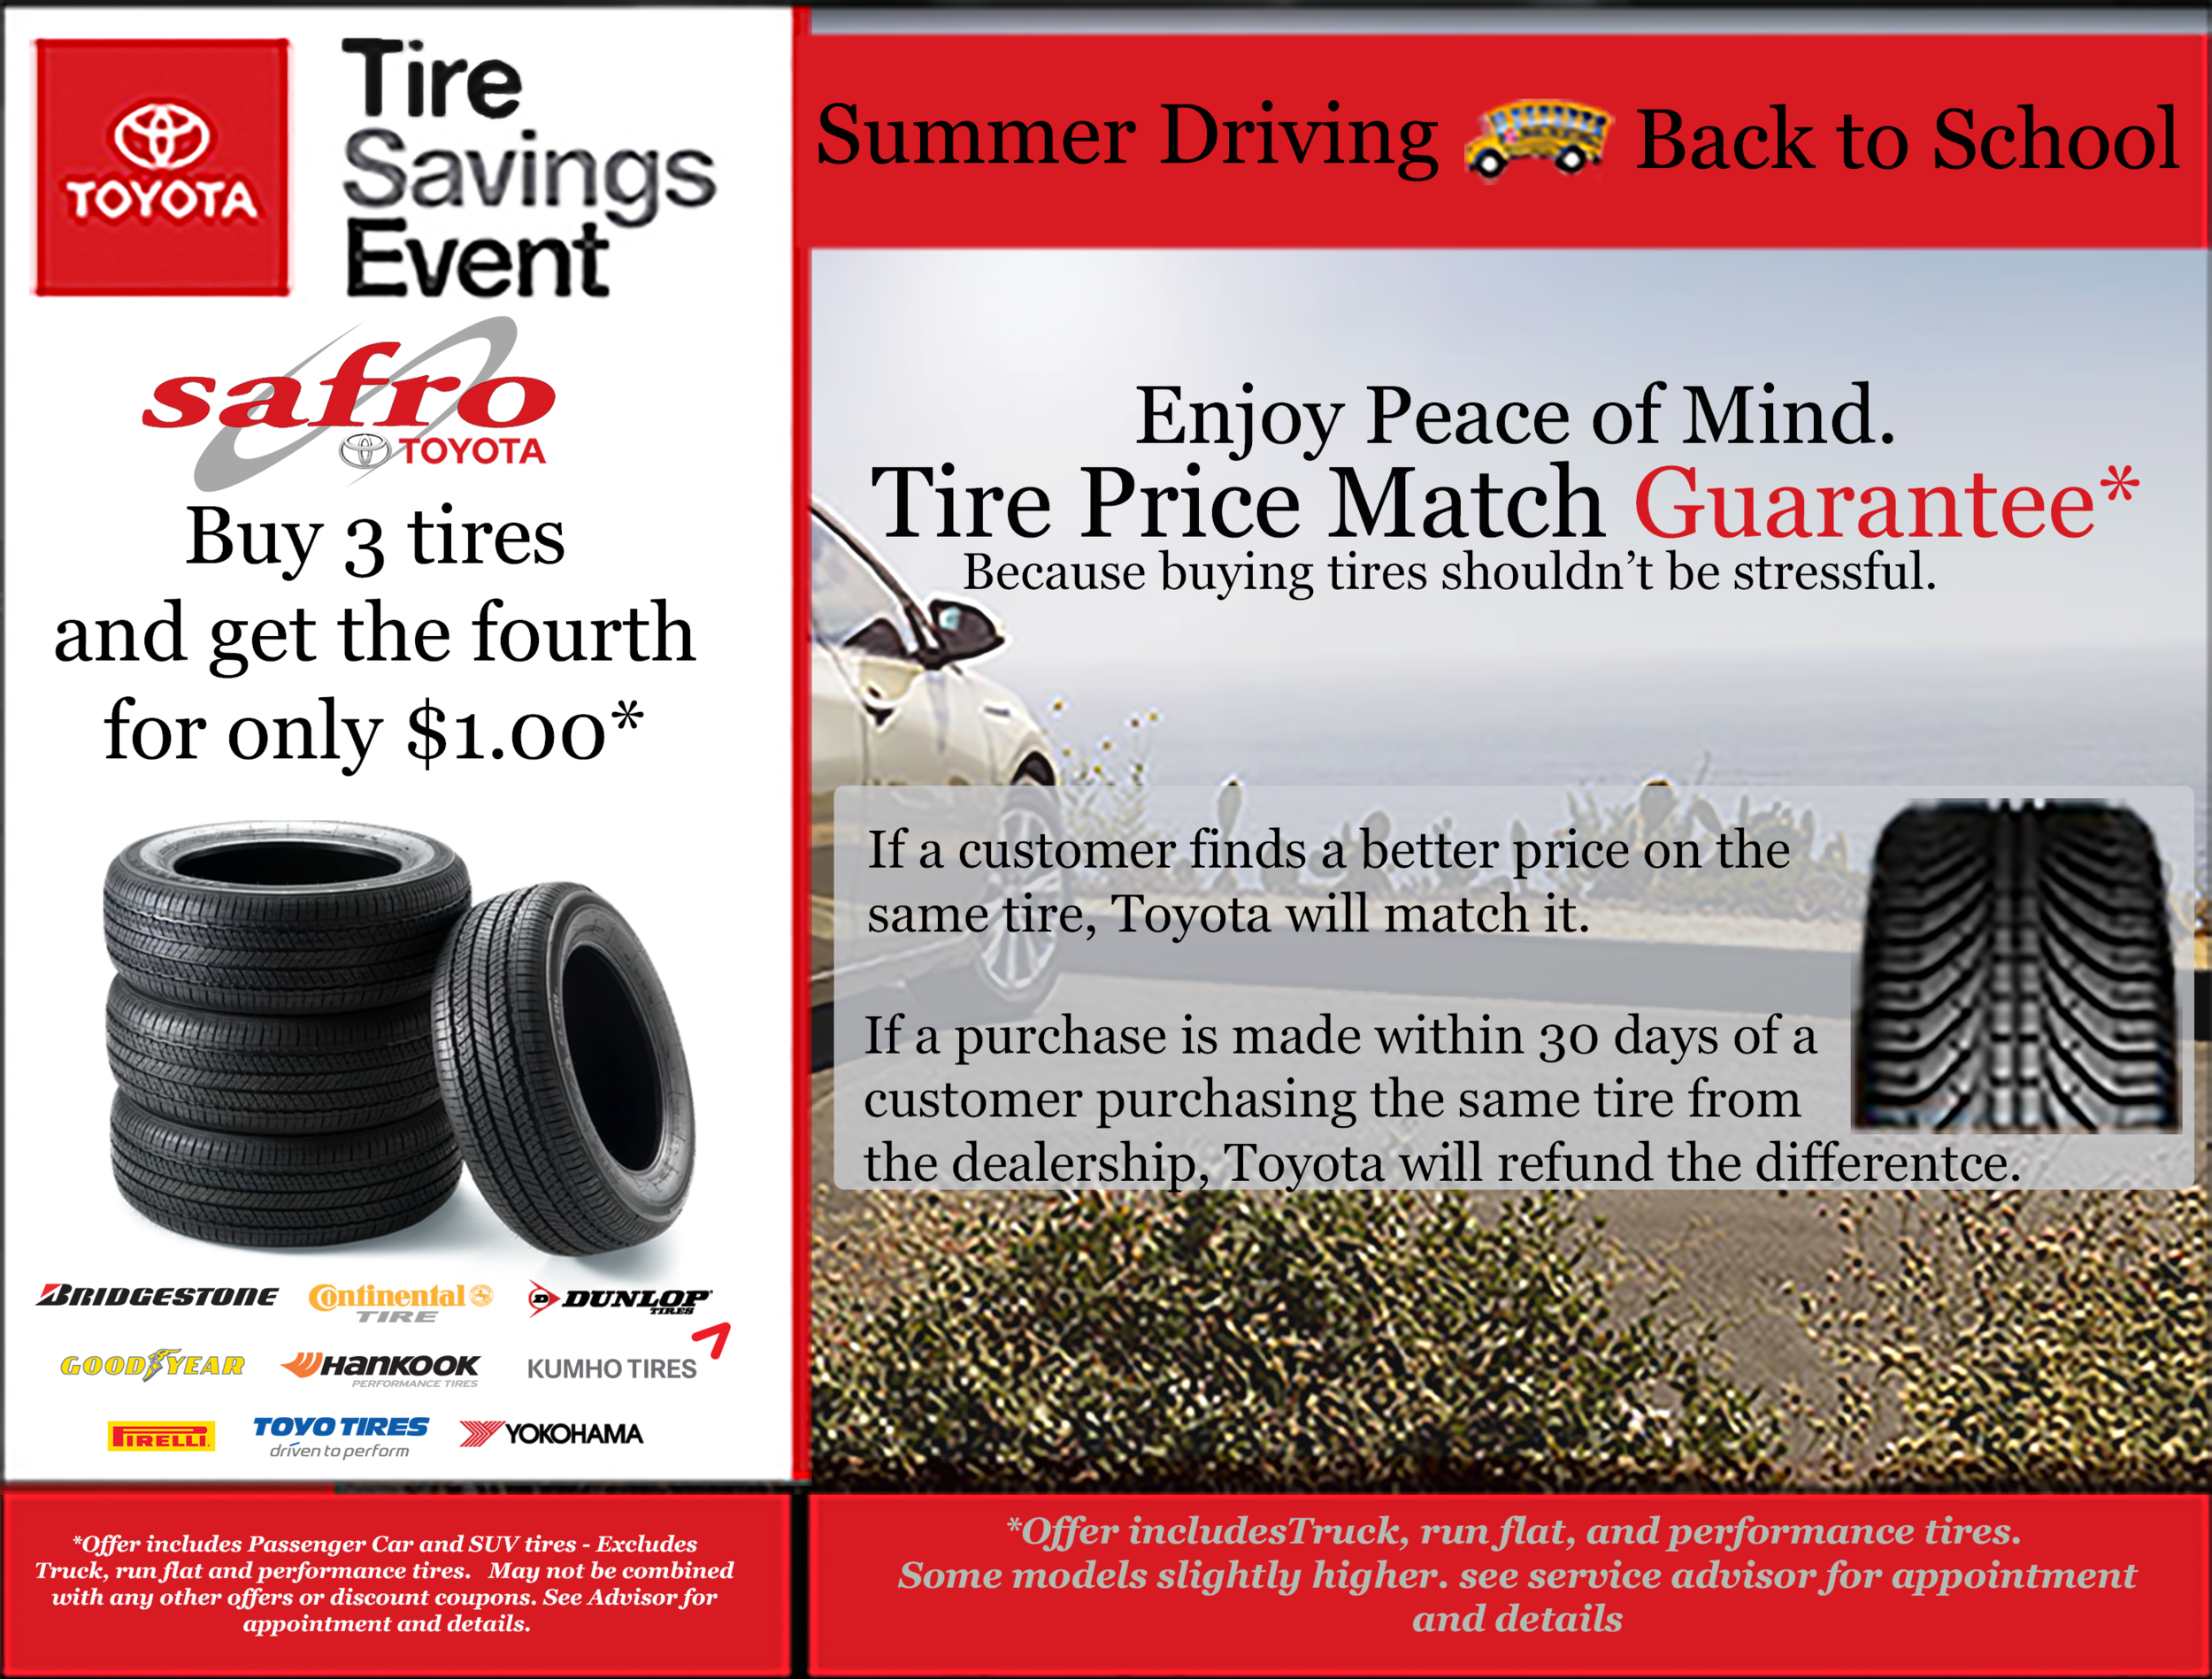 jack safro toyota coupons #7